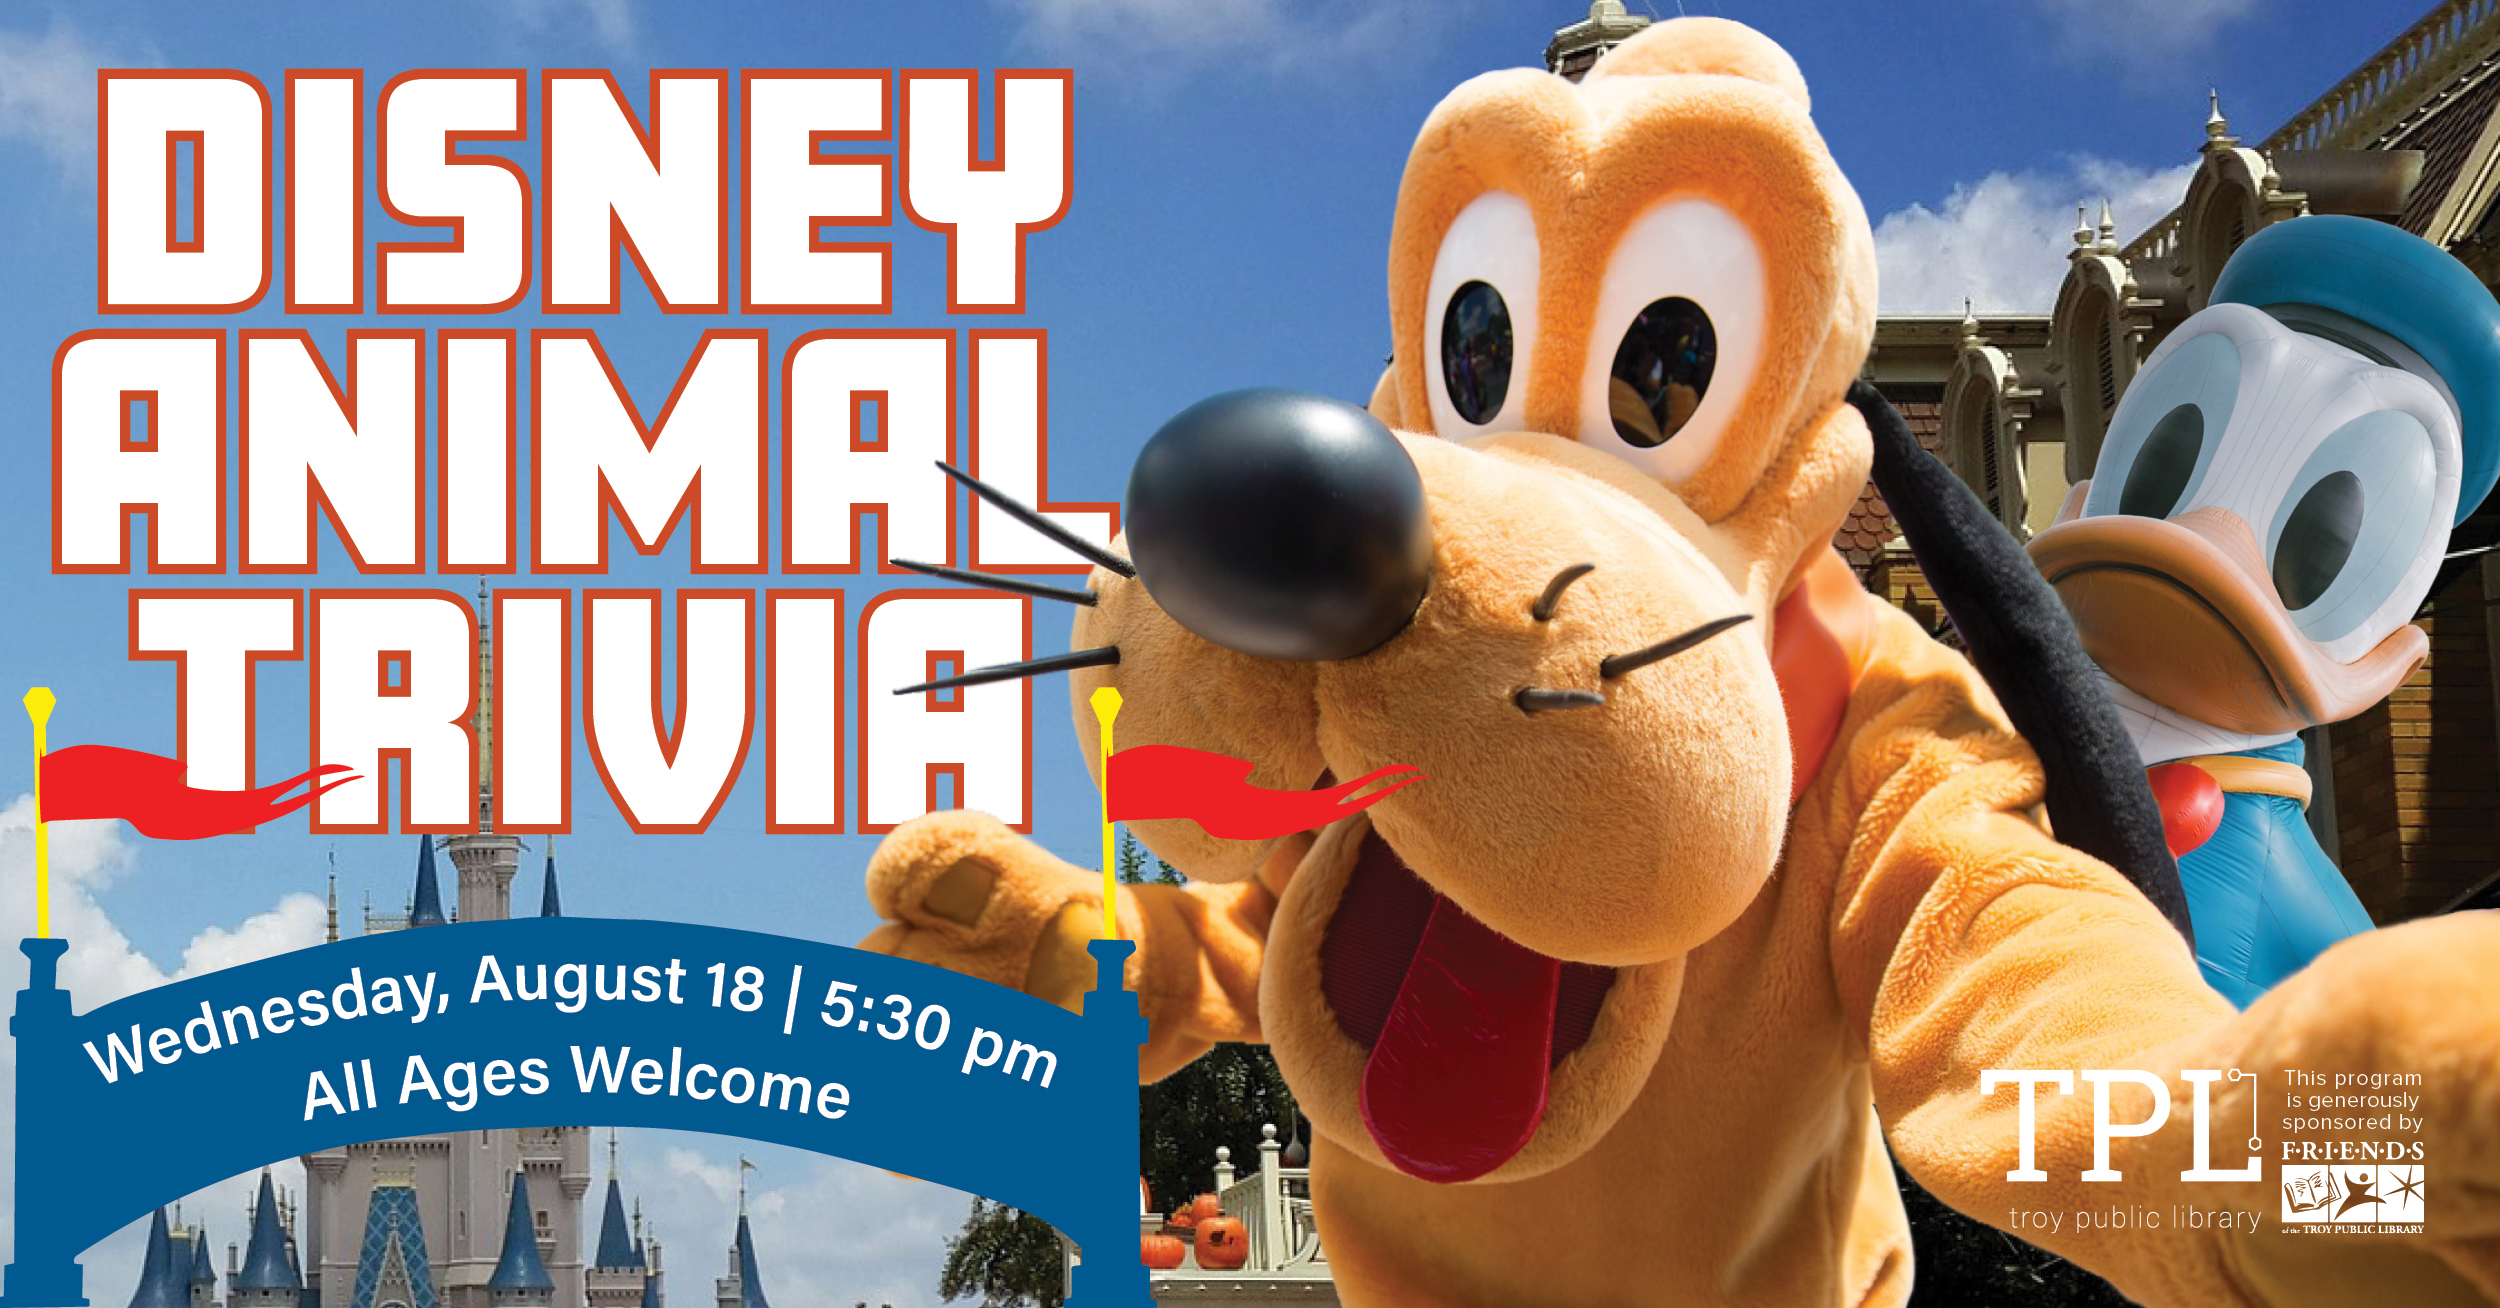 Disney Animal Trivia Wednesday, August 18 at 5:30pm. All ages welcome. This program is generously sponsored by the Friends of the Troy Public Library